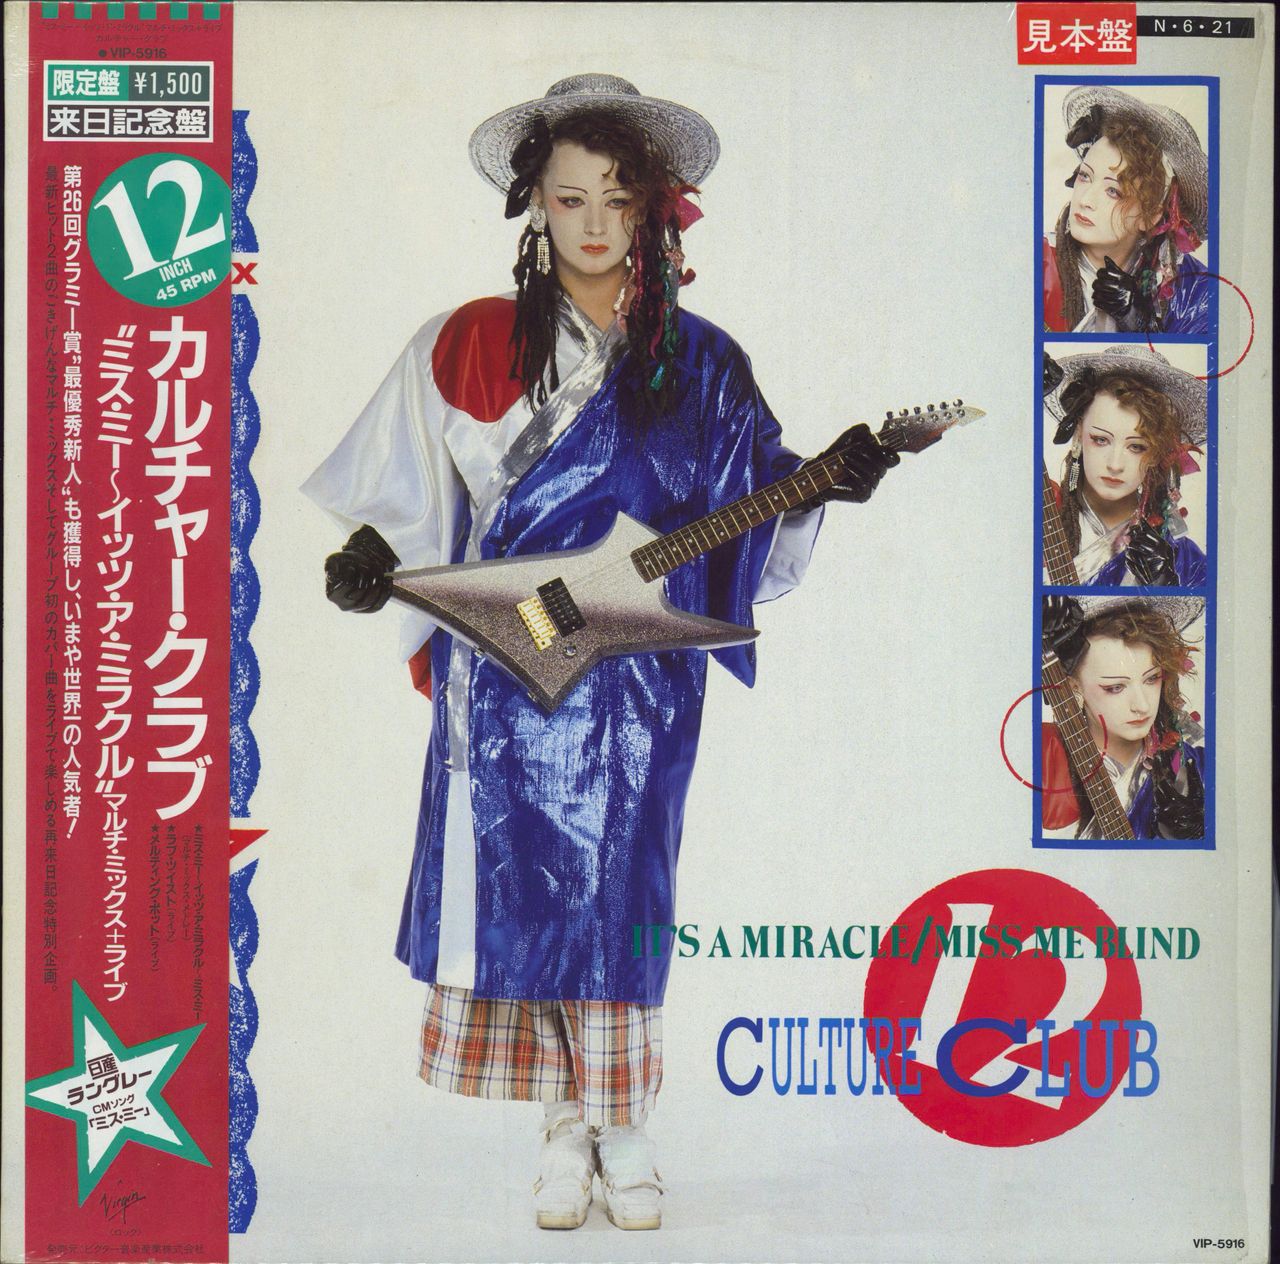 Culture Club It's A Miracle/Miss Me Blind Japanese Promo 12